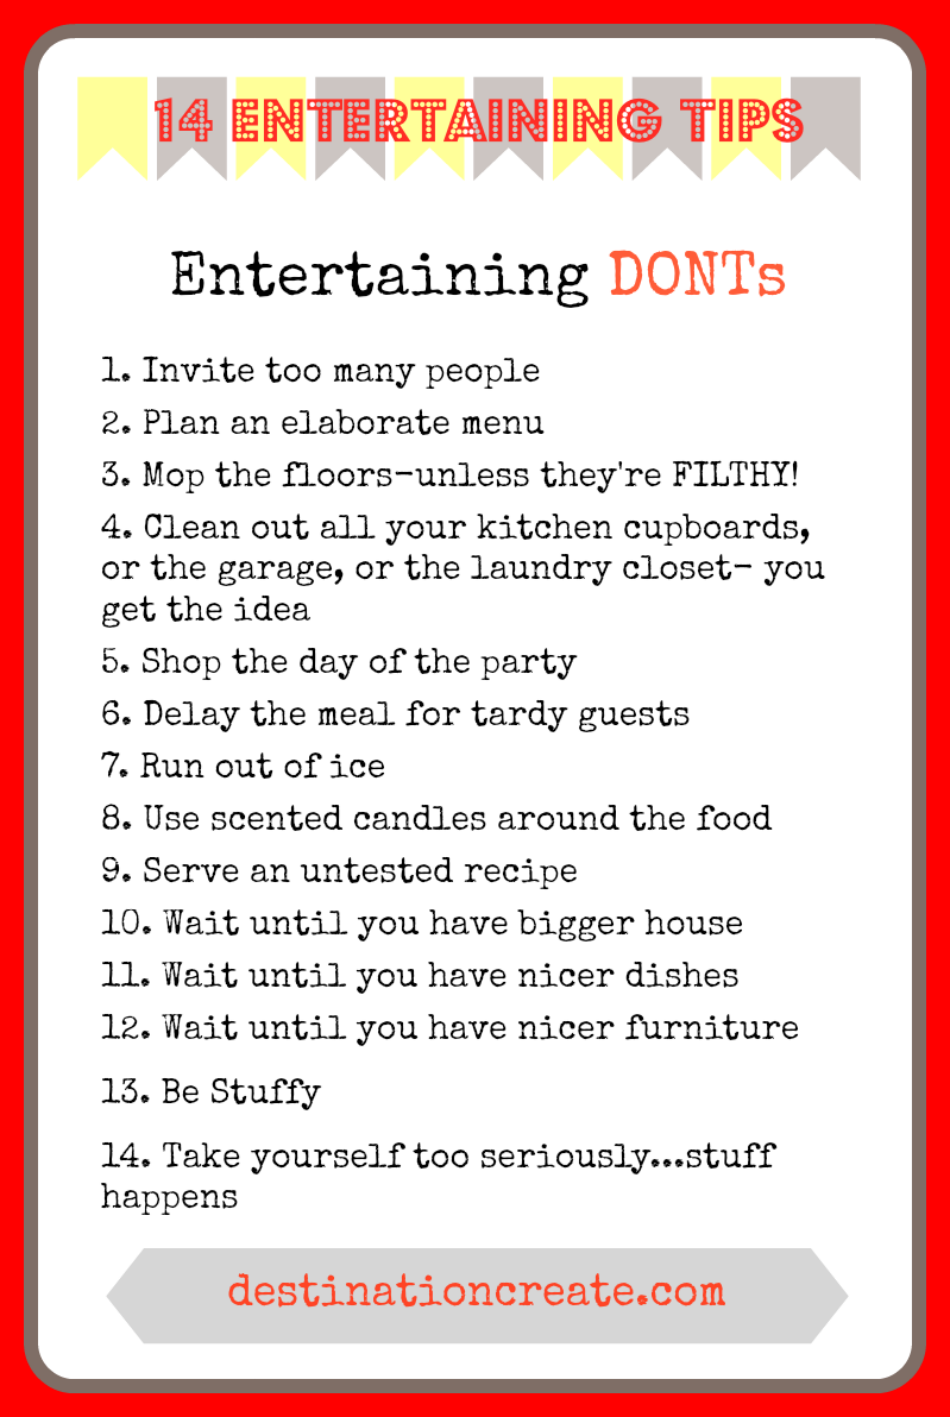 14 Entertaining Tips- the Do's & Don'ts that will make entertaining at home a pleasure instead of a pain